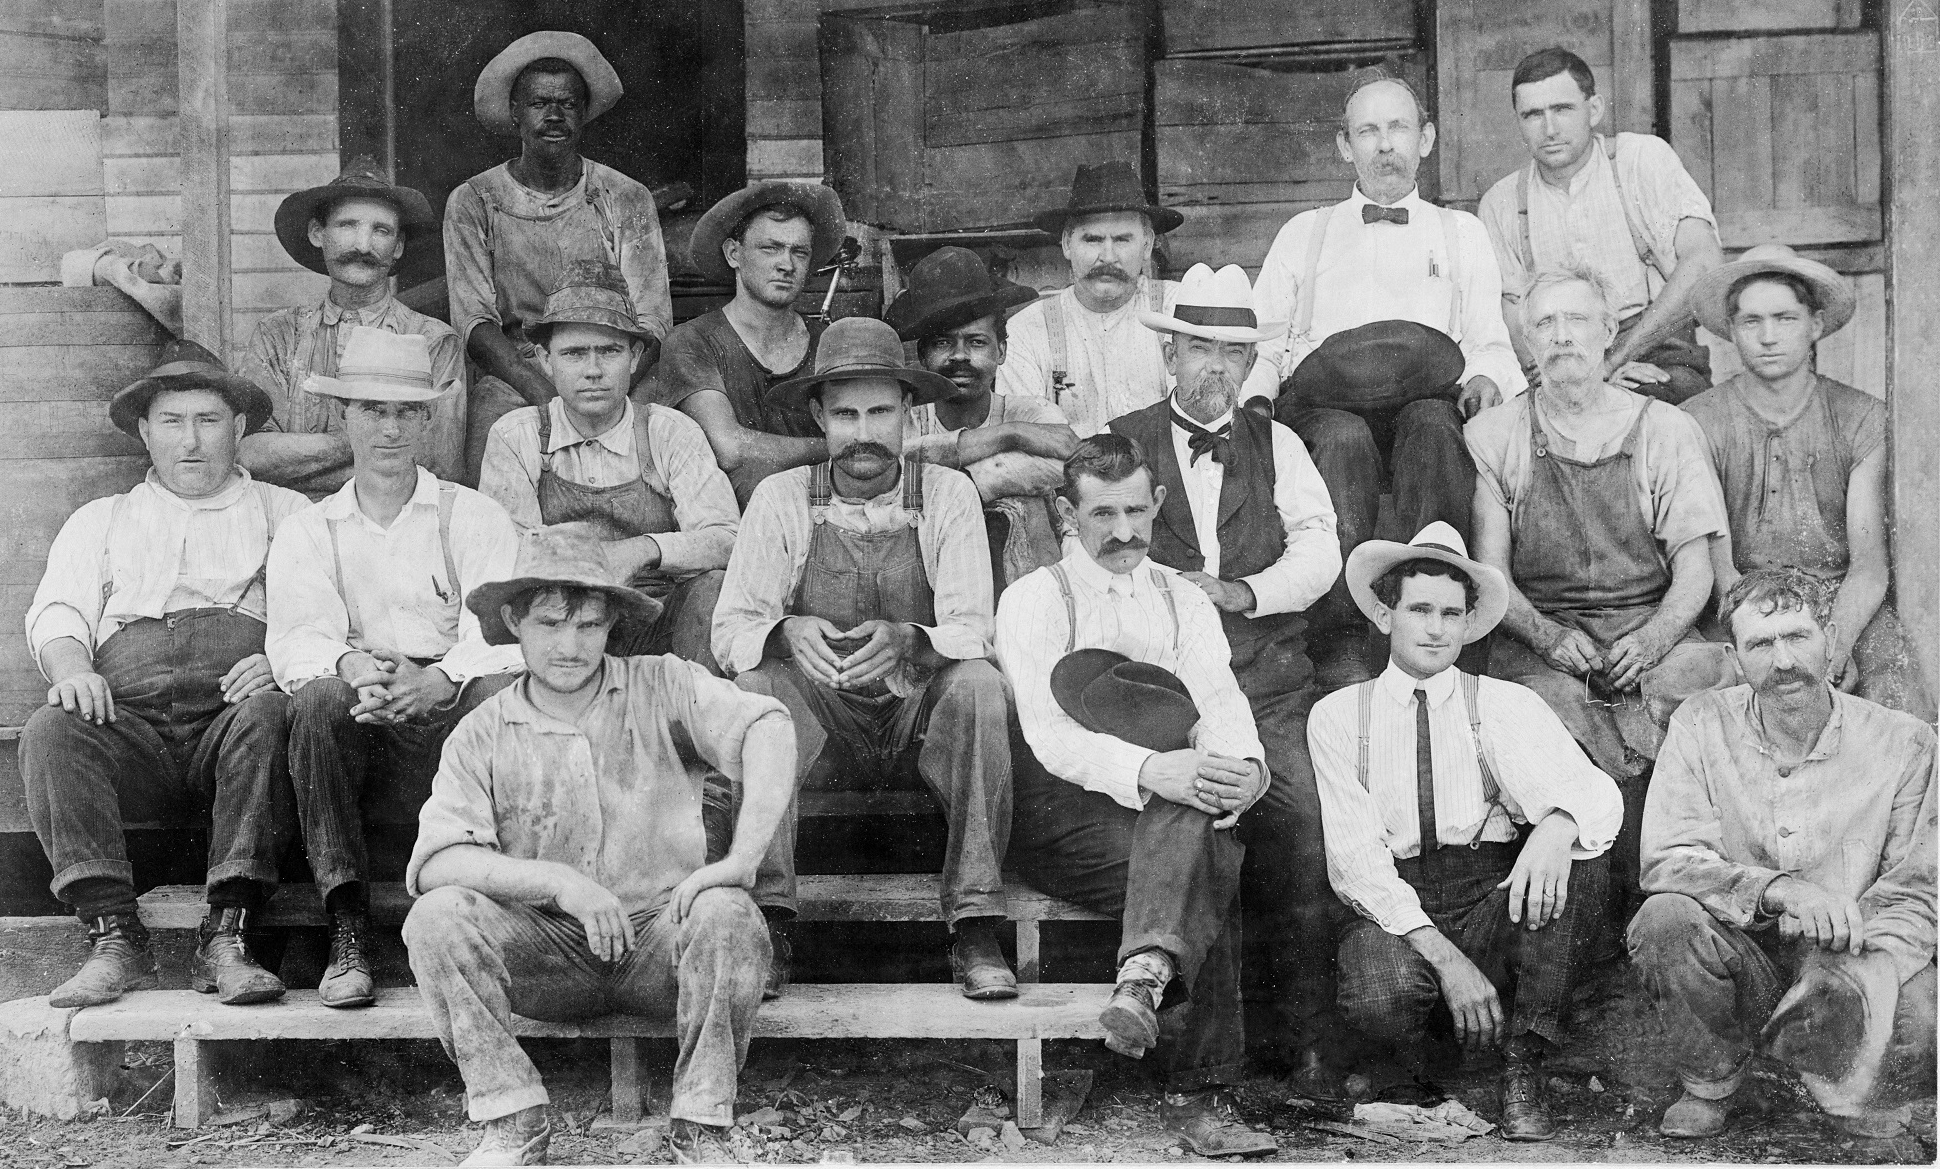 The Jack Daniel Distillery team in a 1900-era photo, with Nearest Green's son George seated next to Jack Daniel. Image courtesy Brown-Forman.